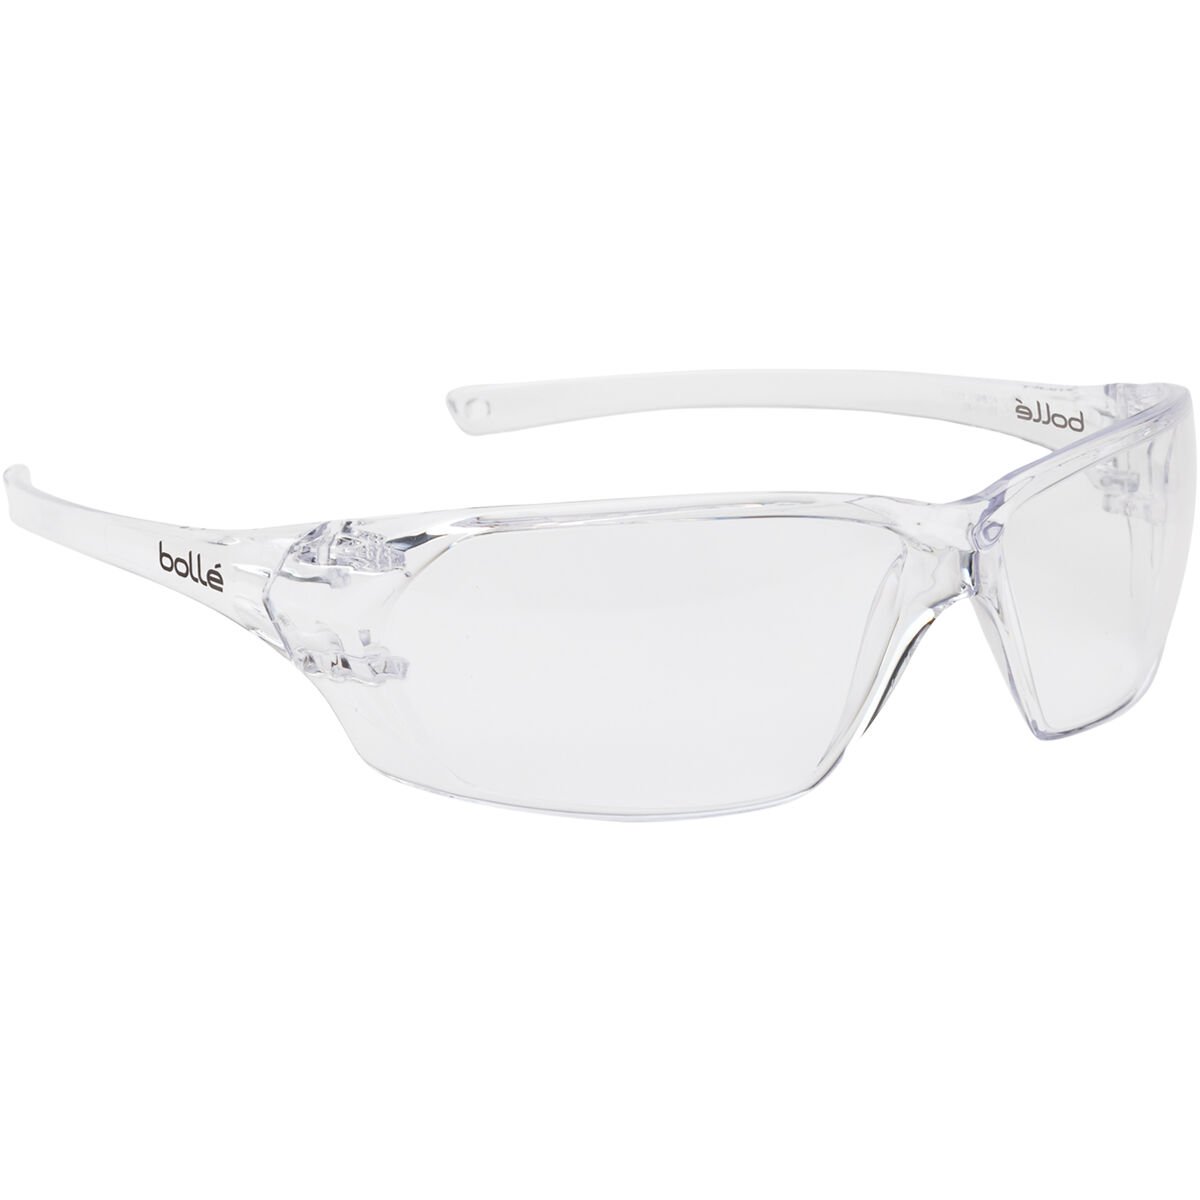 bolle safety glasses clear 